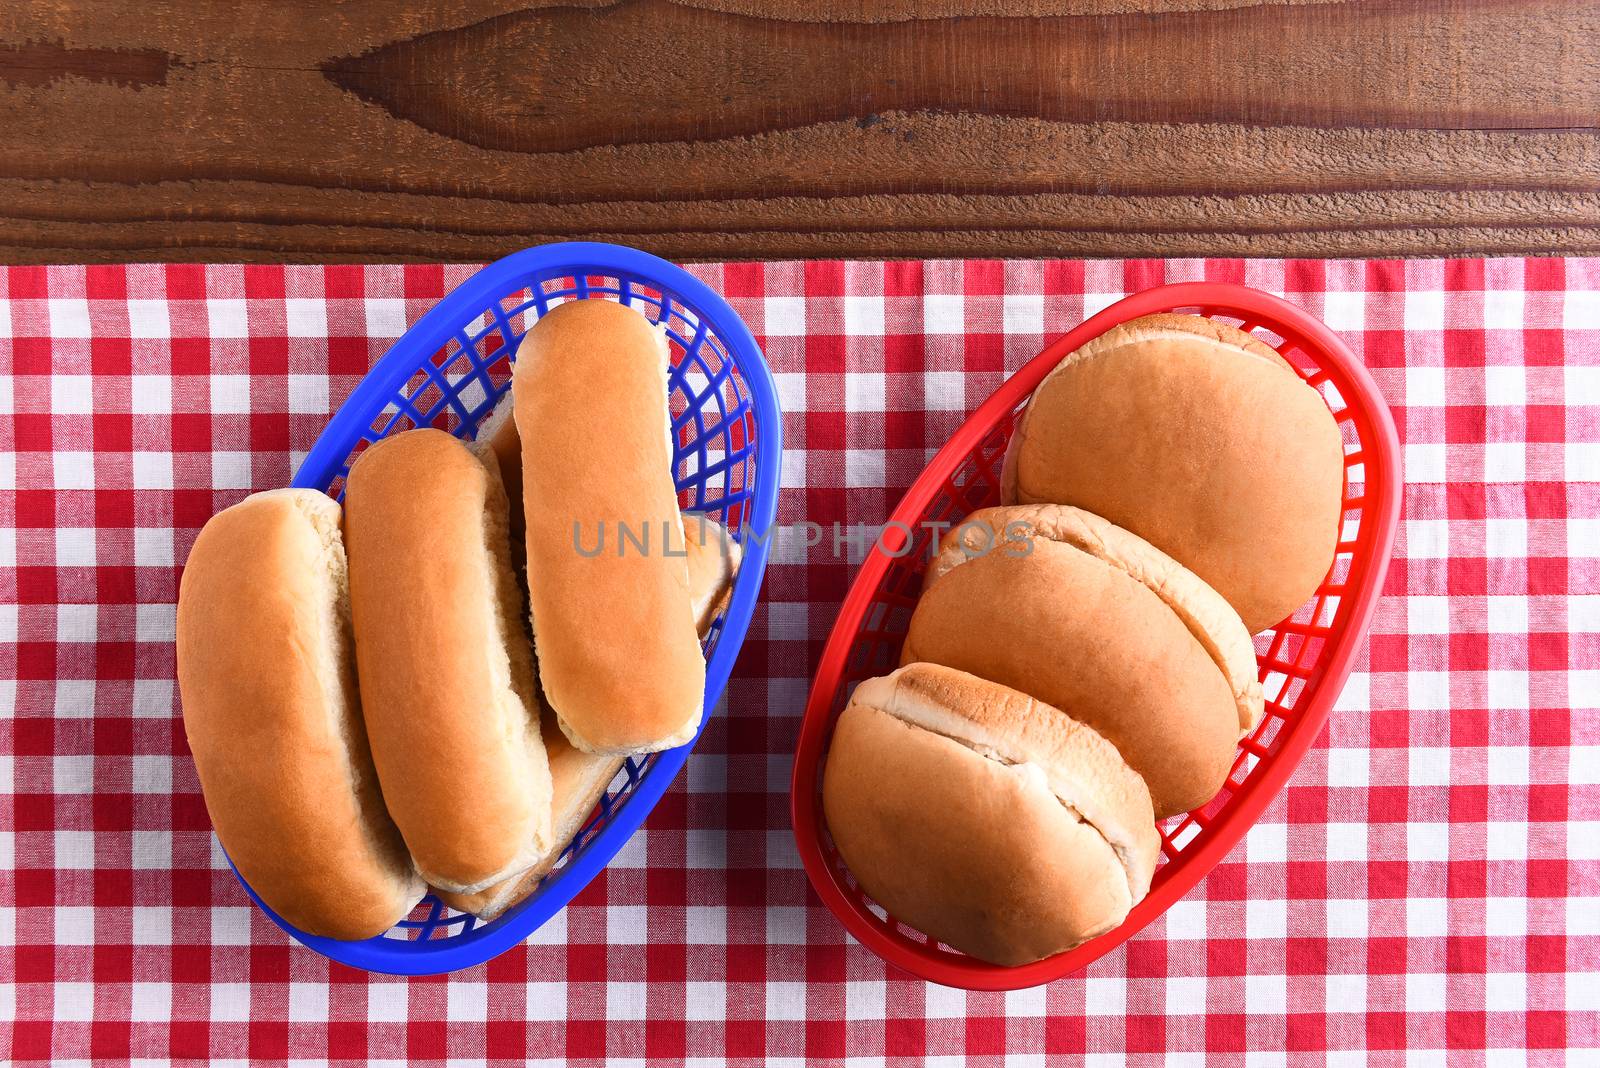 Hamburger and hot dog buns in plastic baskets on a picnic table . the red white and blue themed image is fit for patriotic holiday themes.